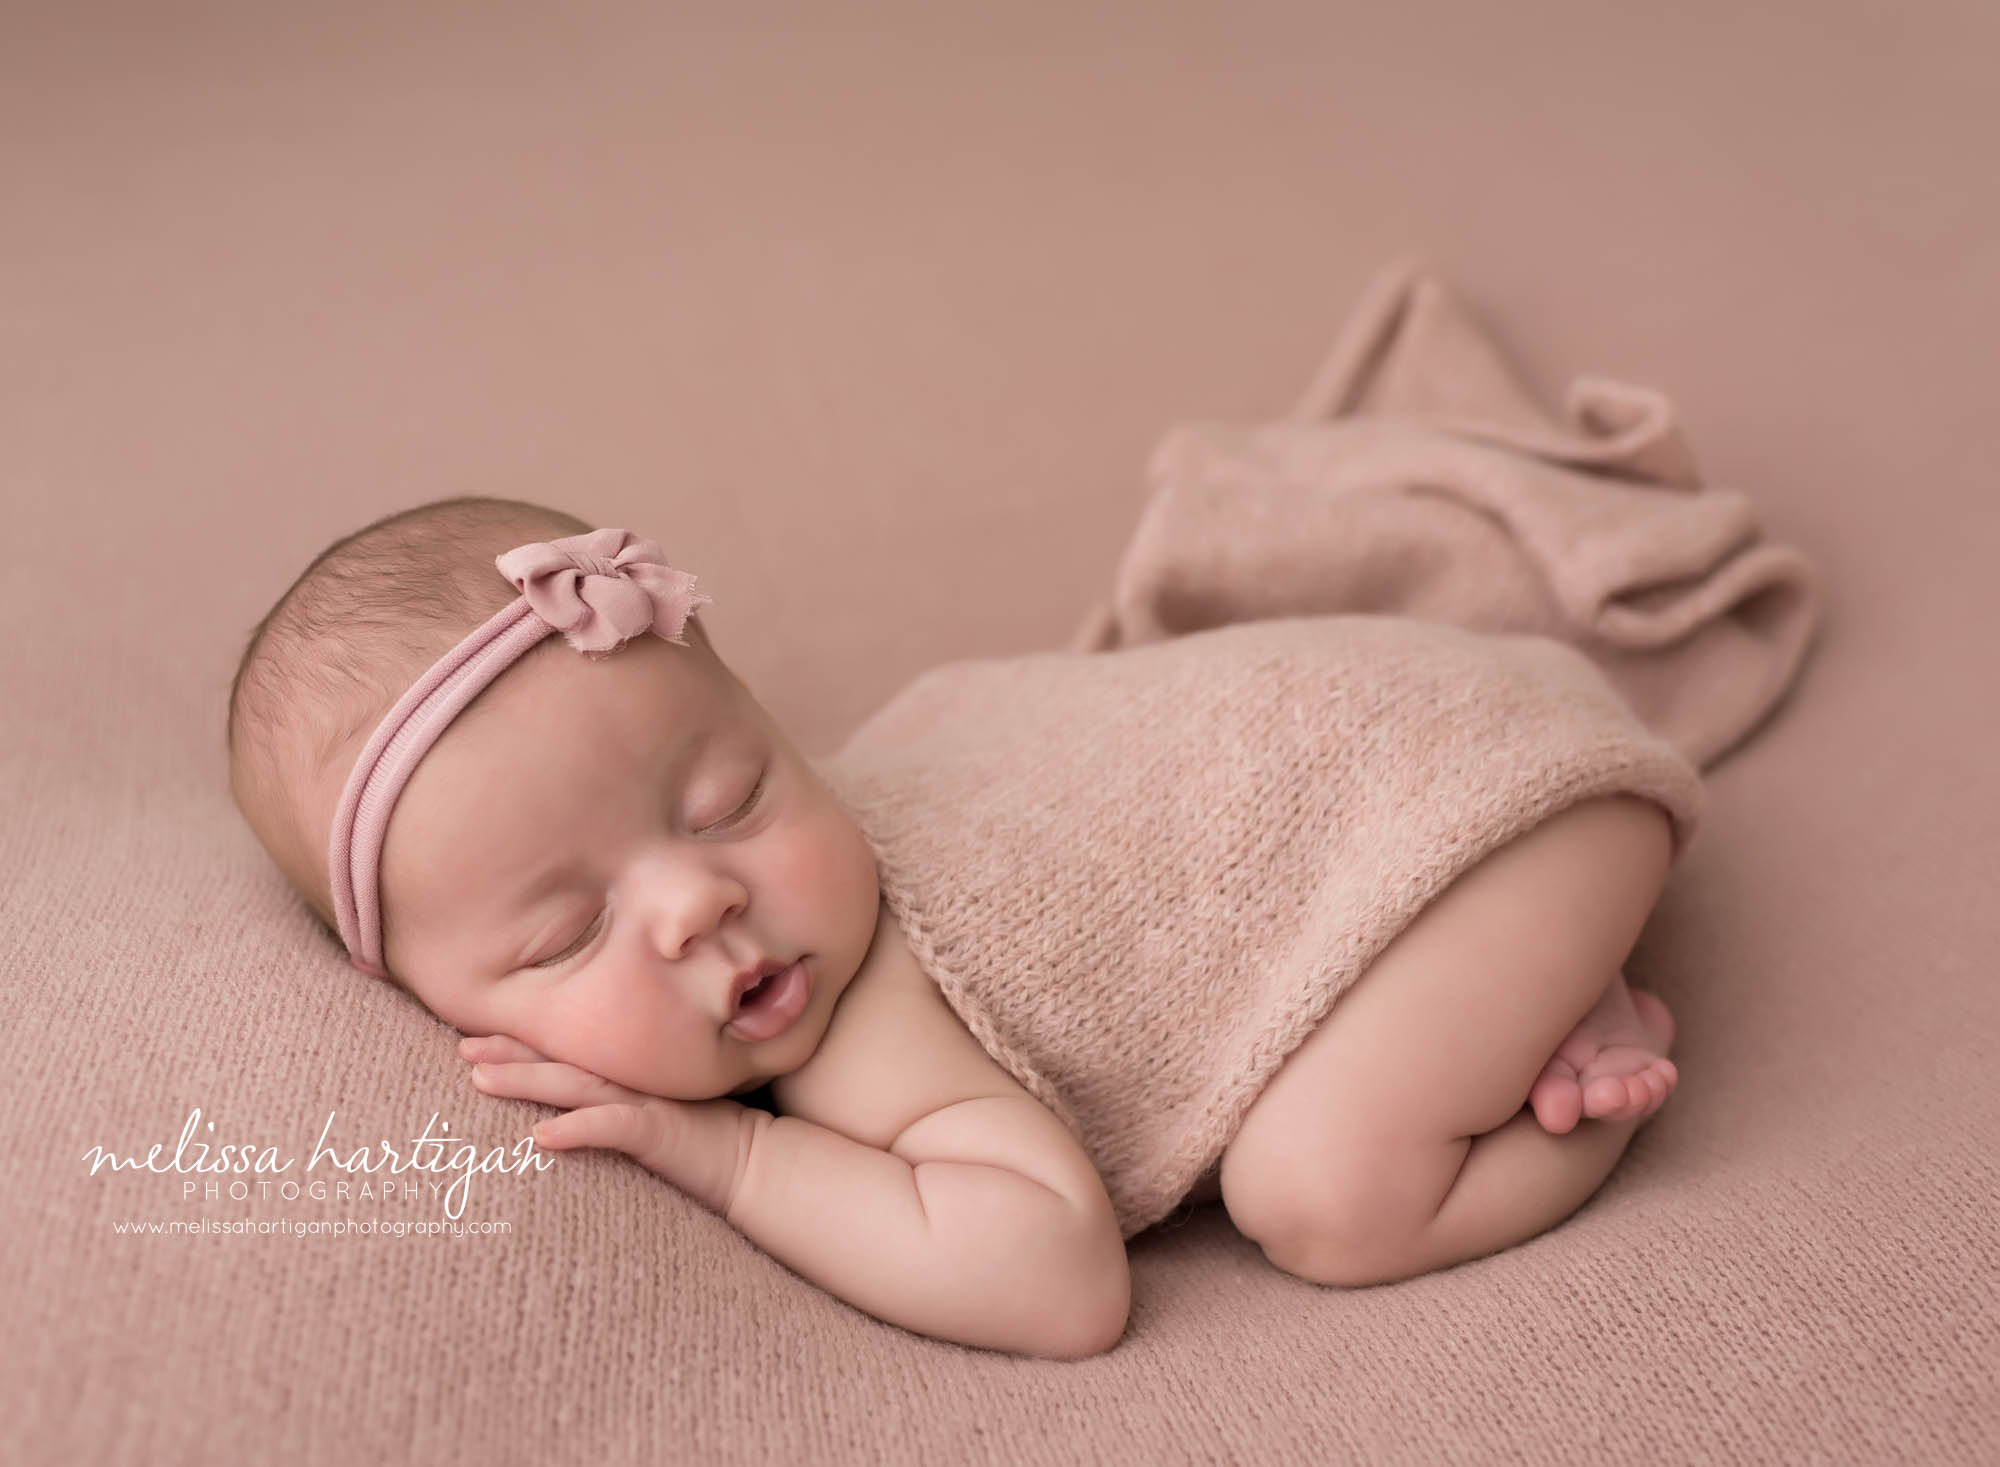 newborn baby girl posed on rose pink colored backdrop wearing pink bow headband and knitted layer draped over her back Newborn photography stafford CT